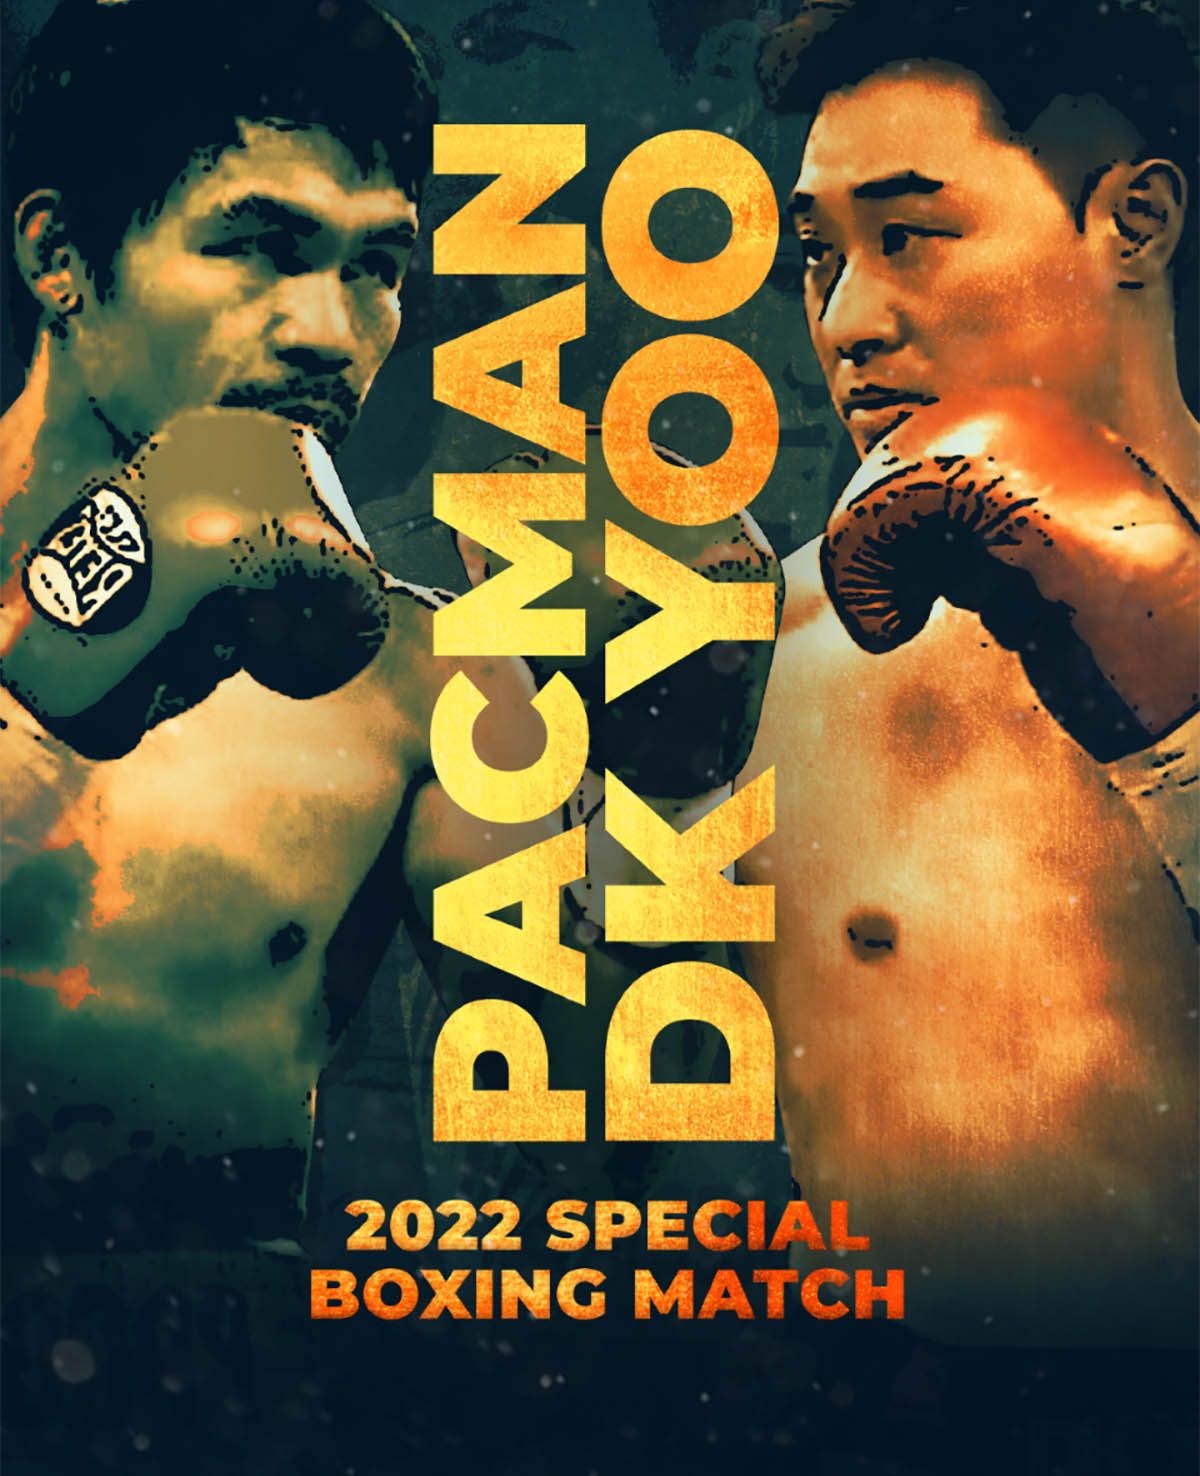 Manny Pacquiao to face Korean Youtuber DK Yoo in exhibition